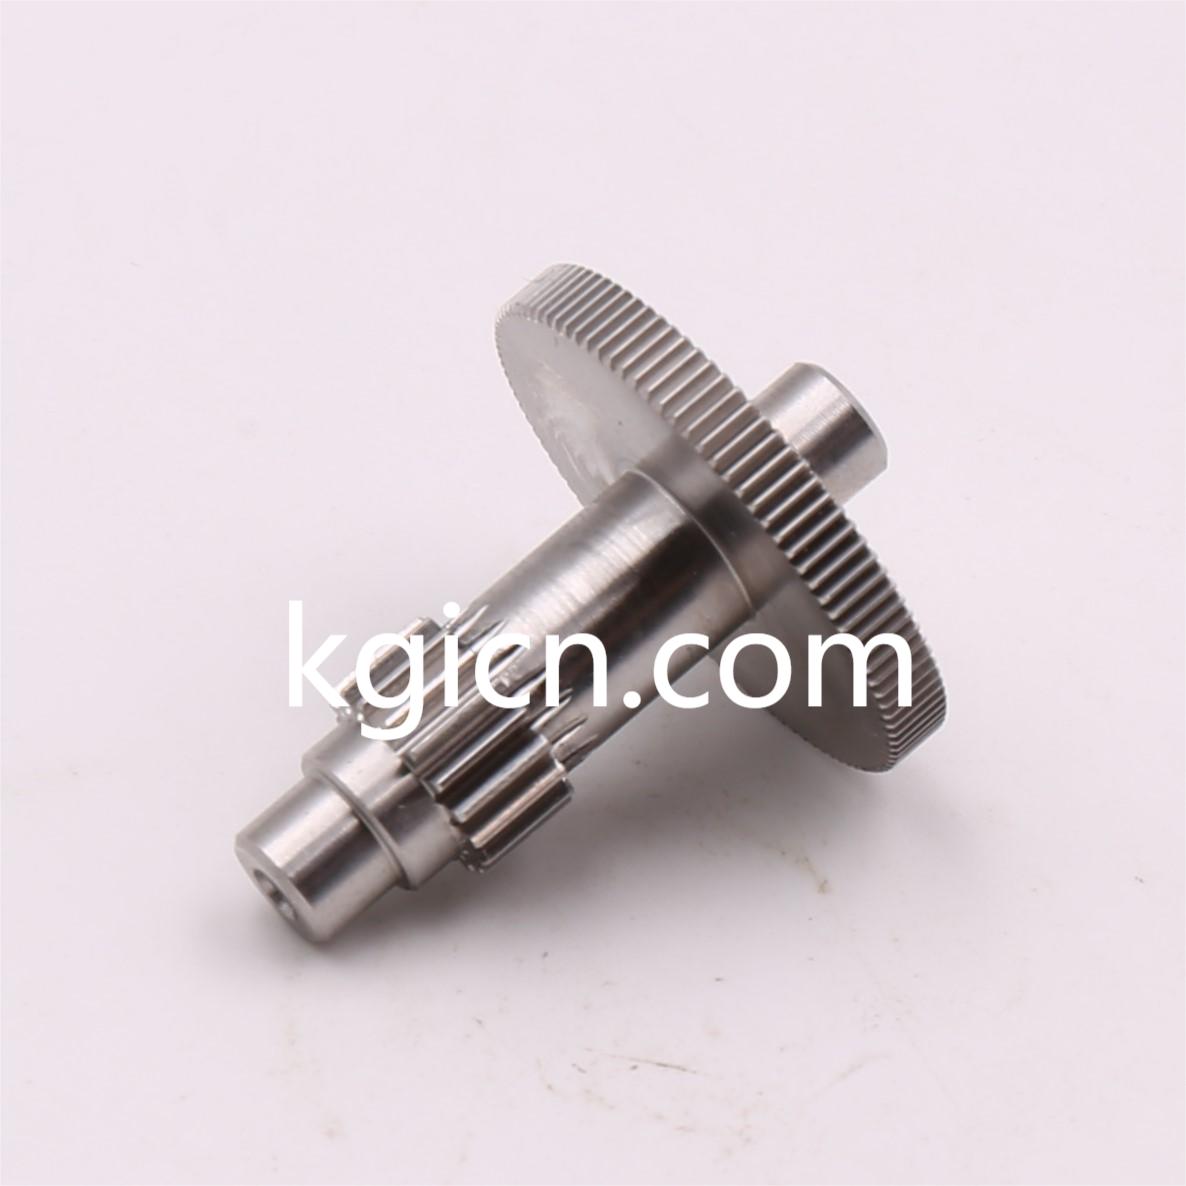 Customized precision helical gear transmission shafts